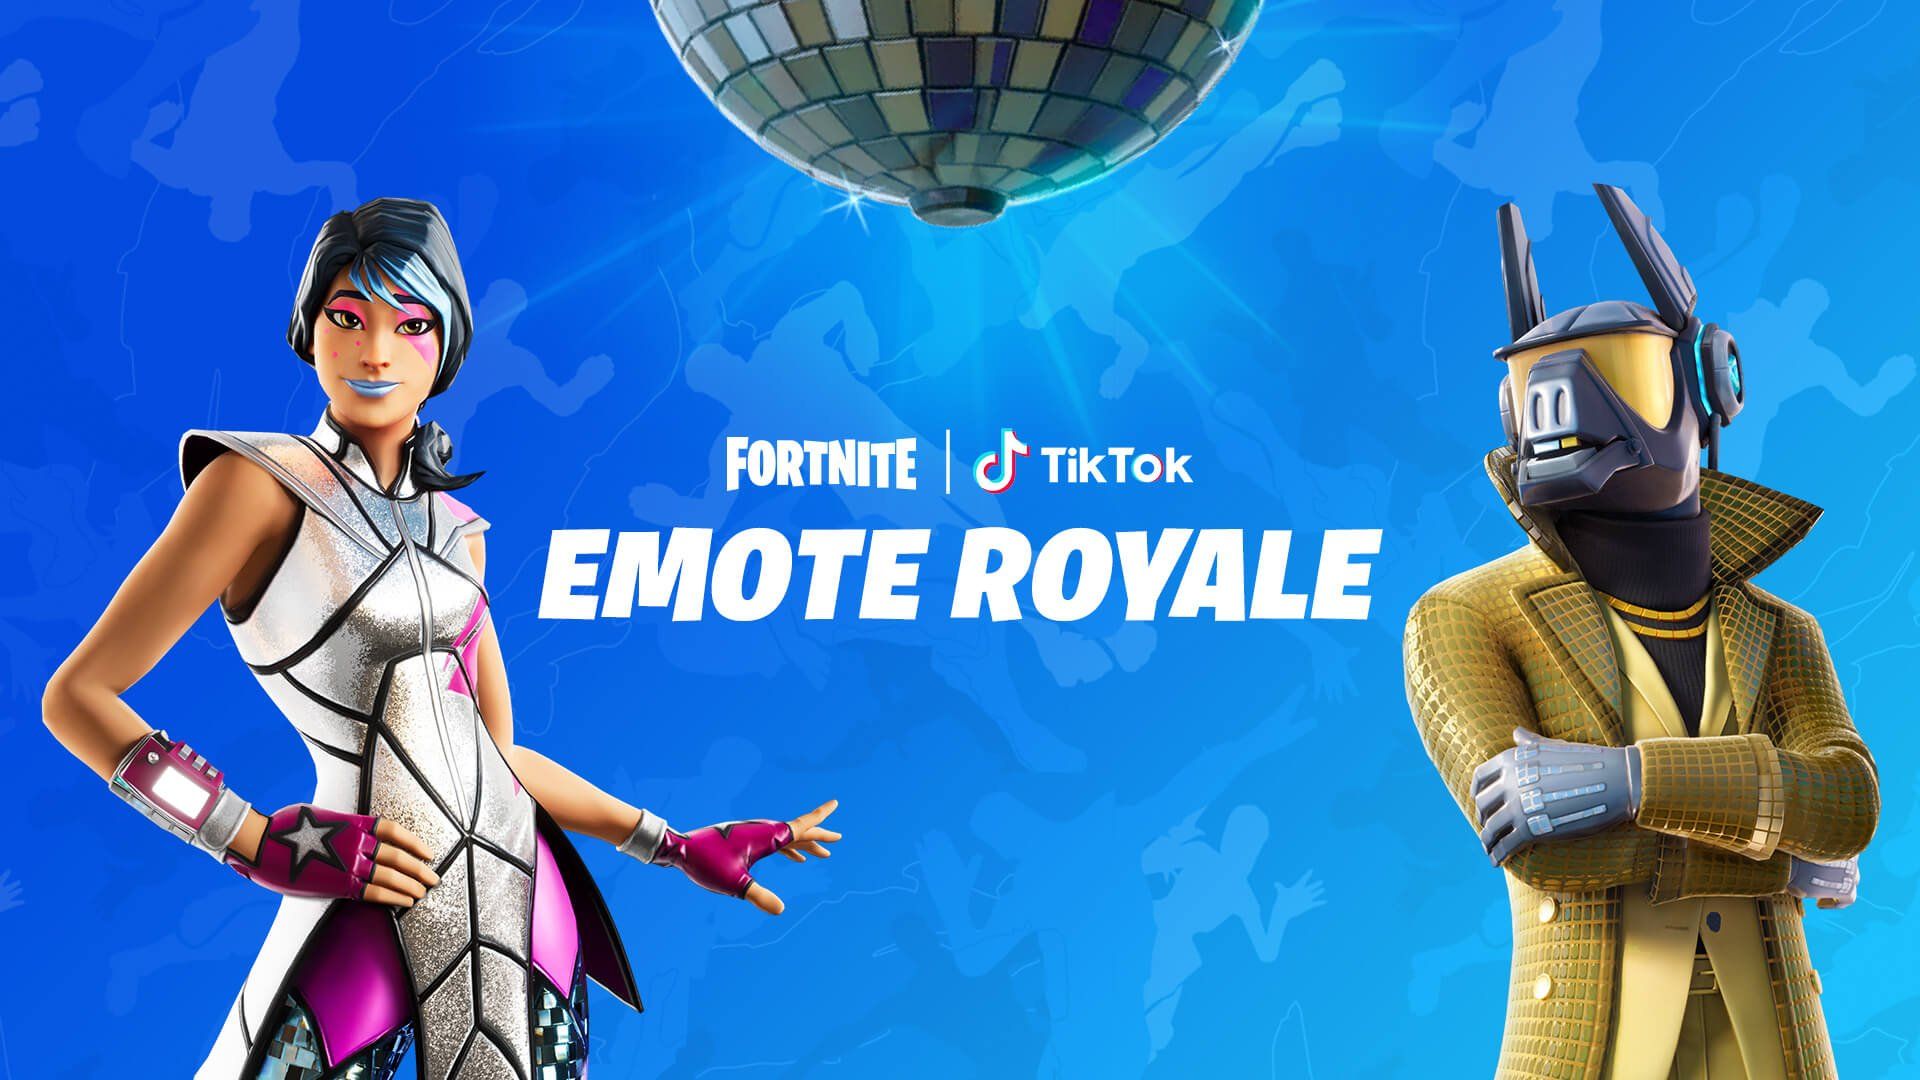 Get Your Very Own Emote Released In Fortnite With This New Competition